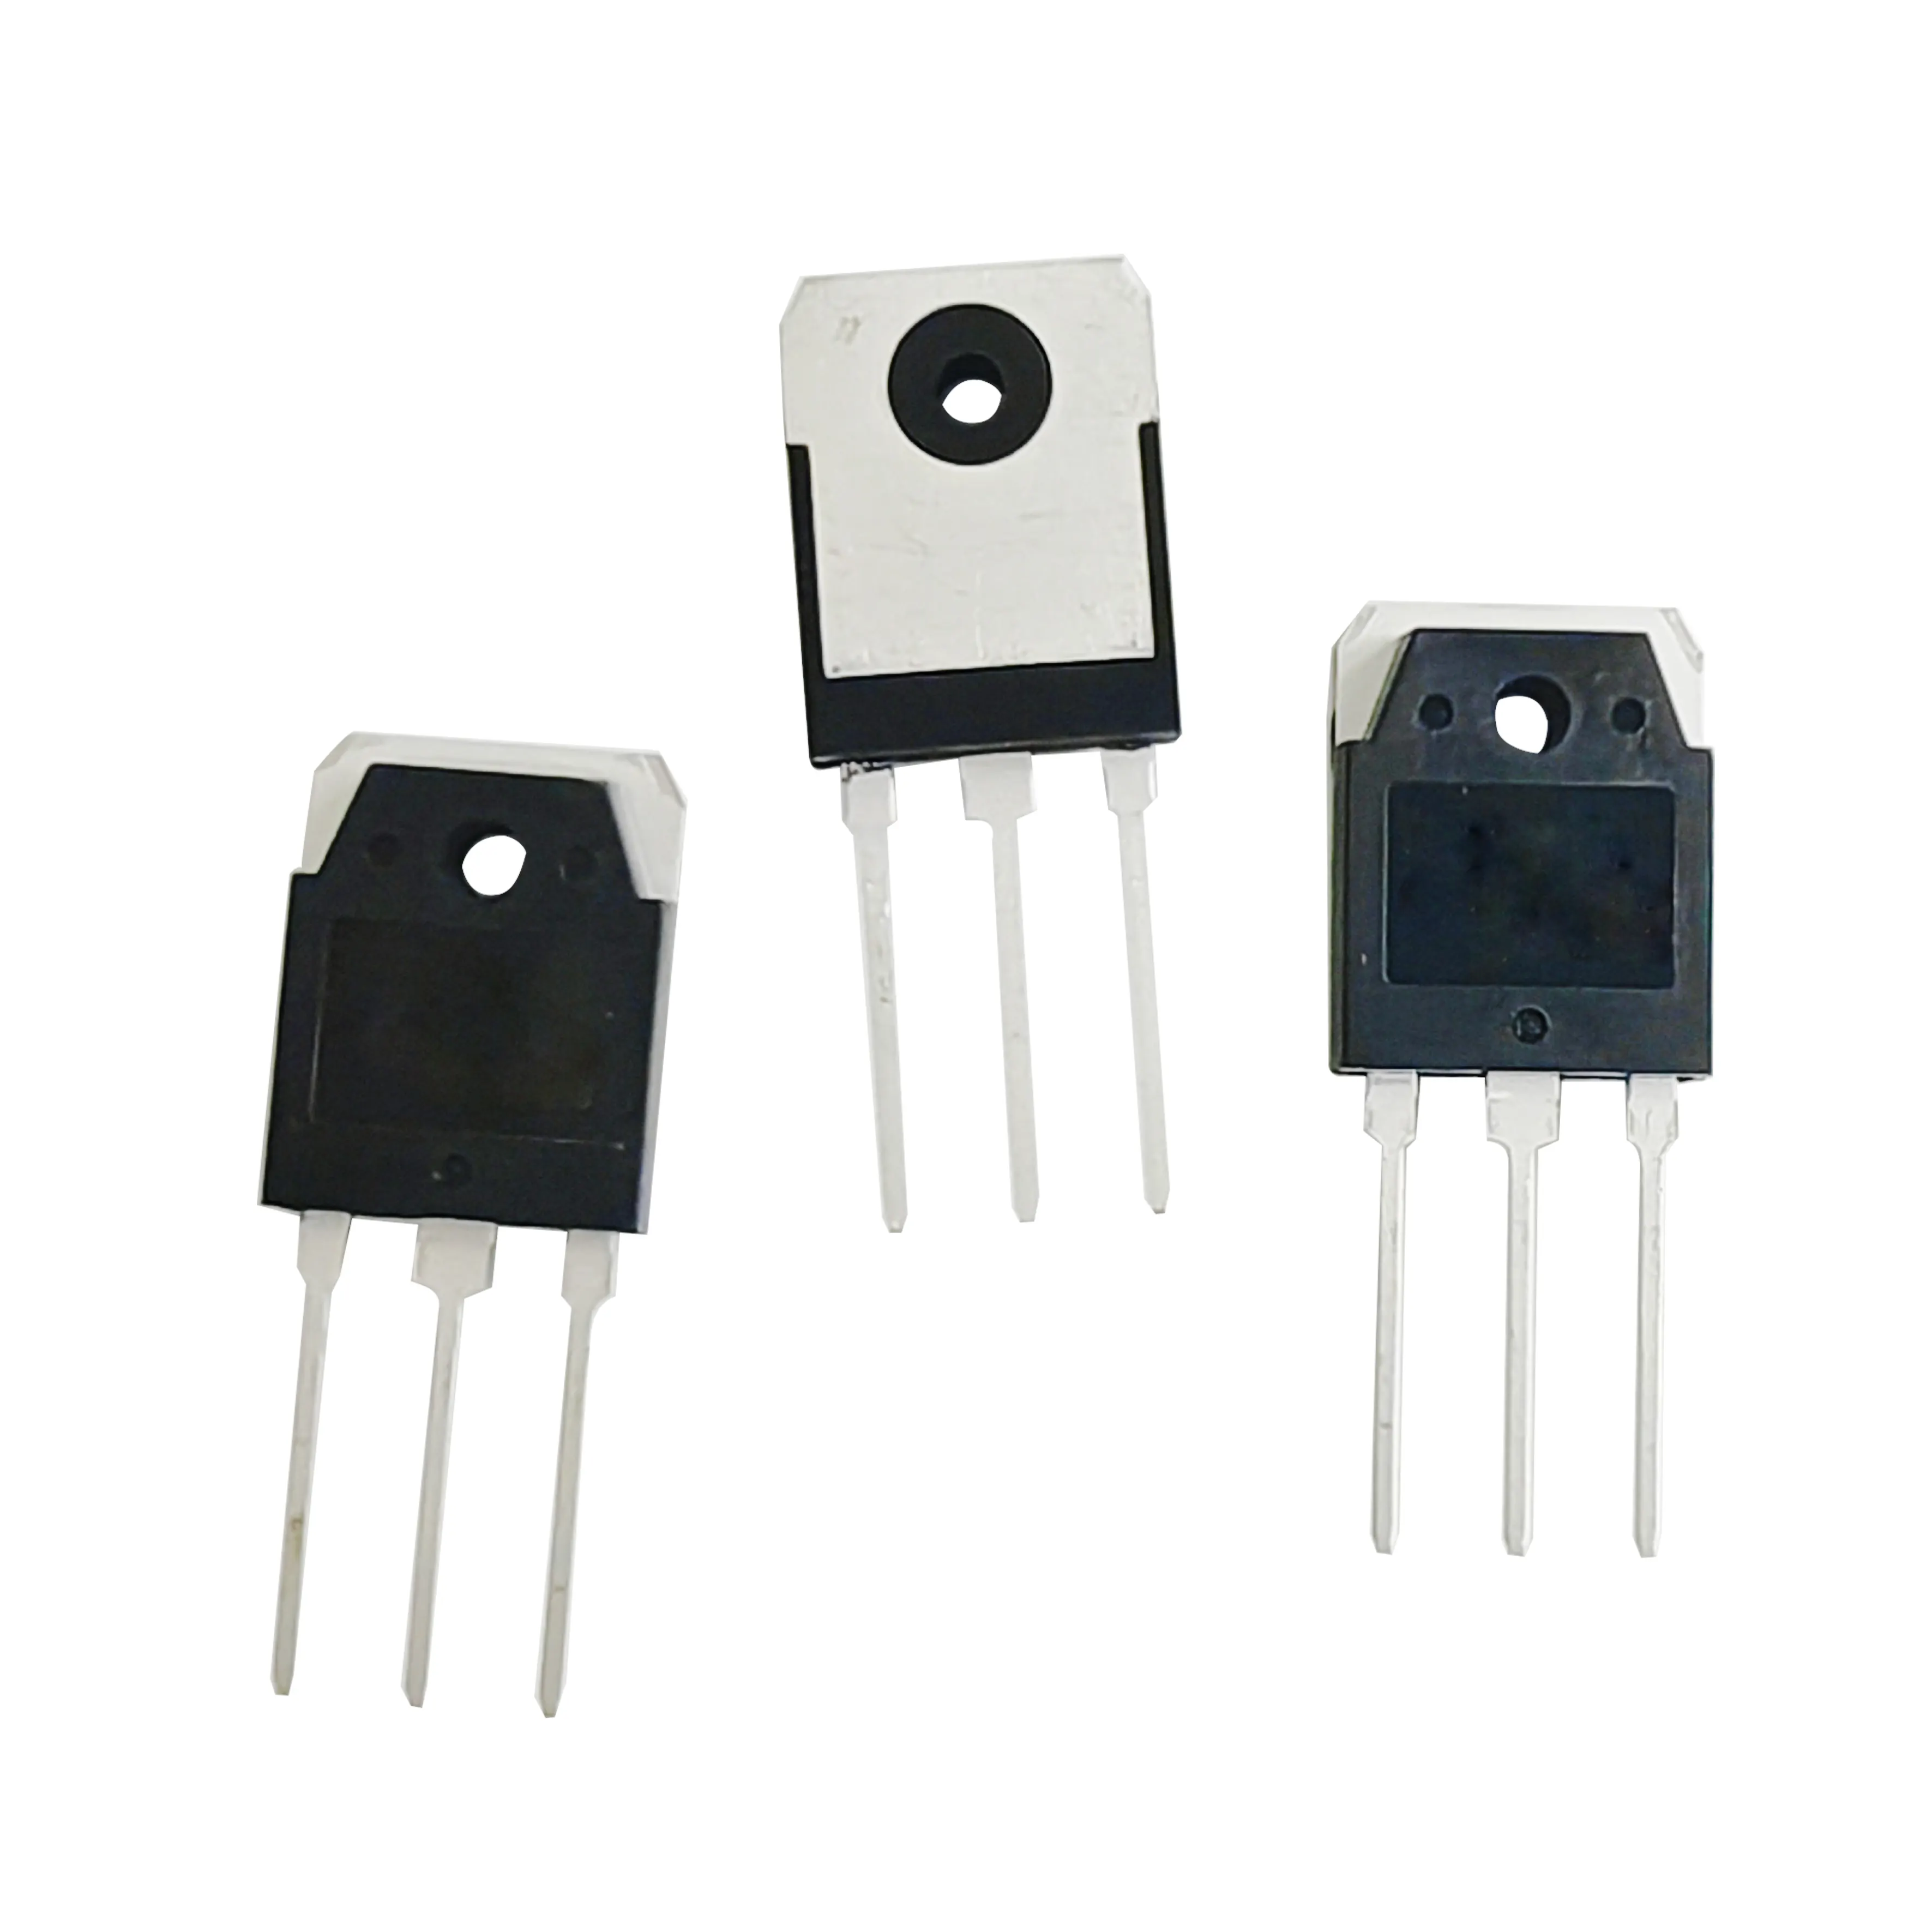 28A 600V MOSFET N-Channel Enhancement Mode Power MOSFET Transistor TO-3PN Package RDS On 0.125 Ohm For UPS Applications